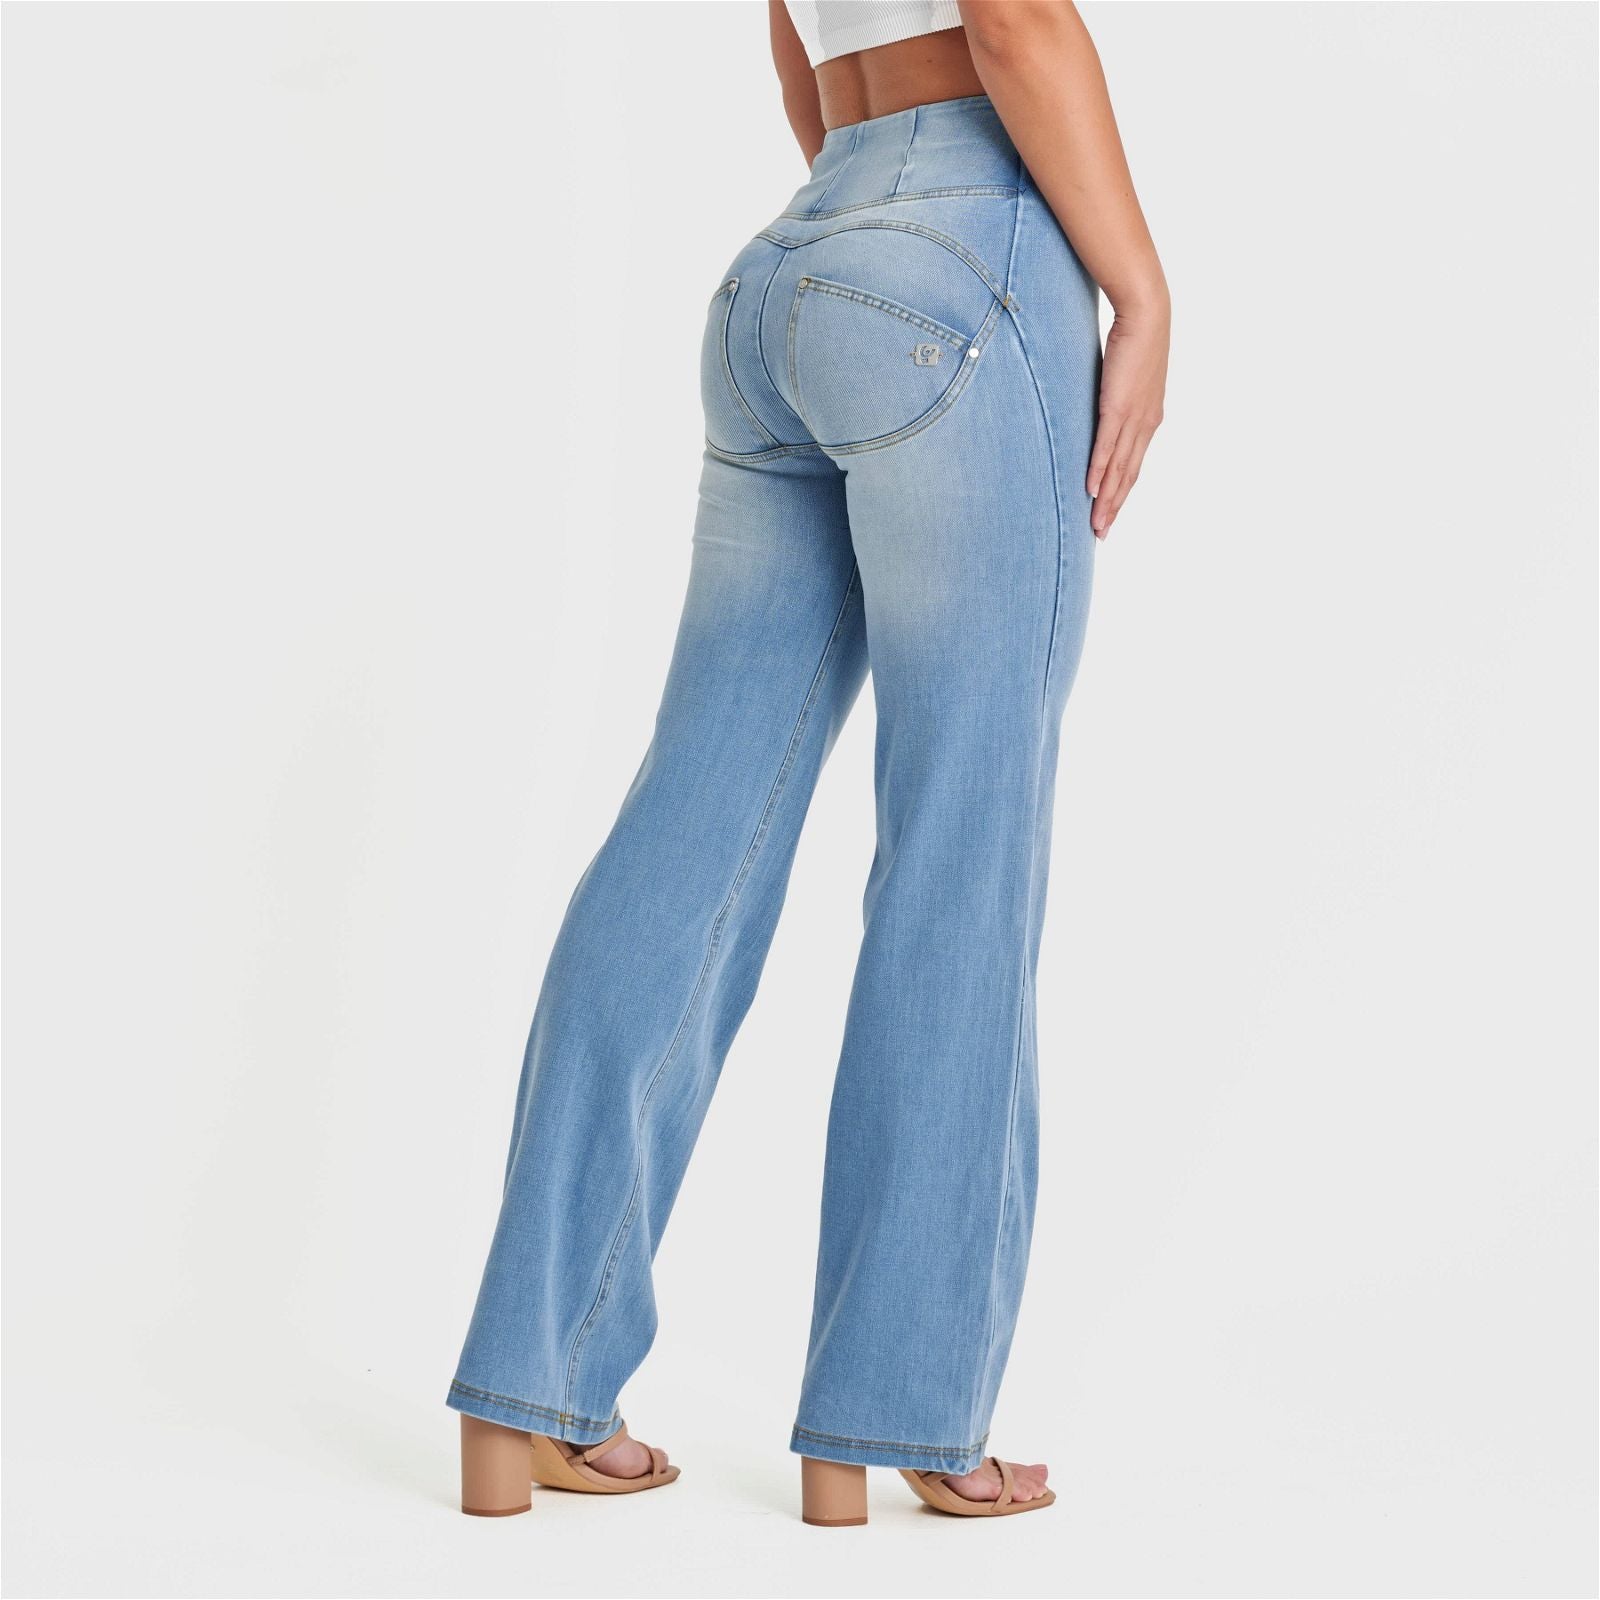 WR.UP® SNUG Jeans - High Waisted - Flare - Light Blue + Yellow Stitching 2